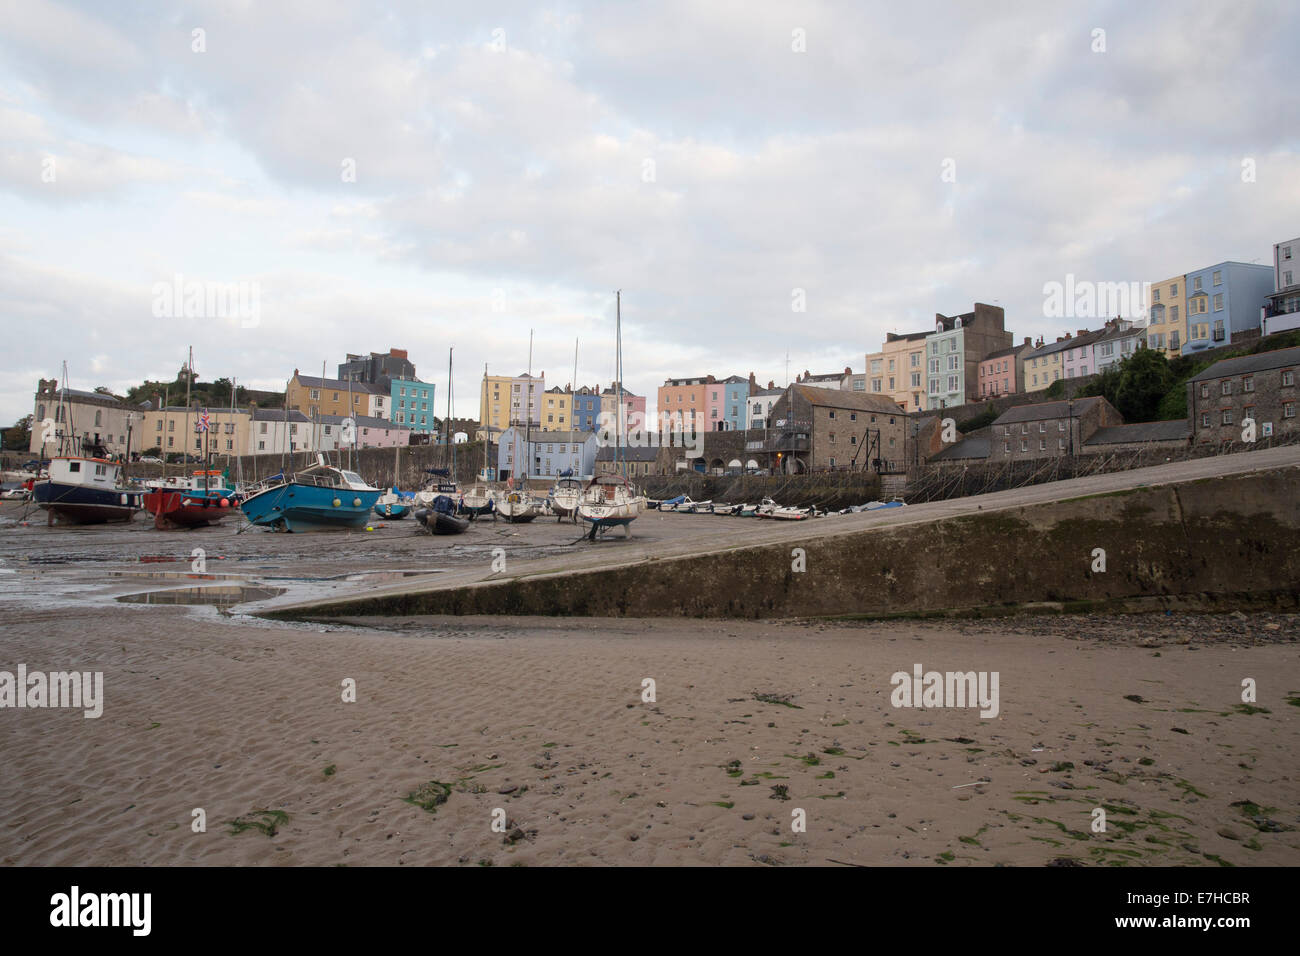 Tenby harbour at dusk. Low tide. Boats on sand. Stock Photo